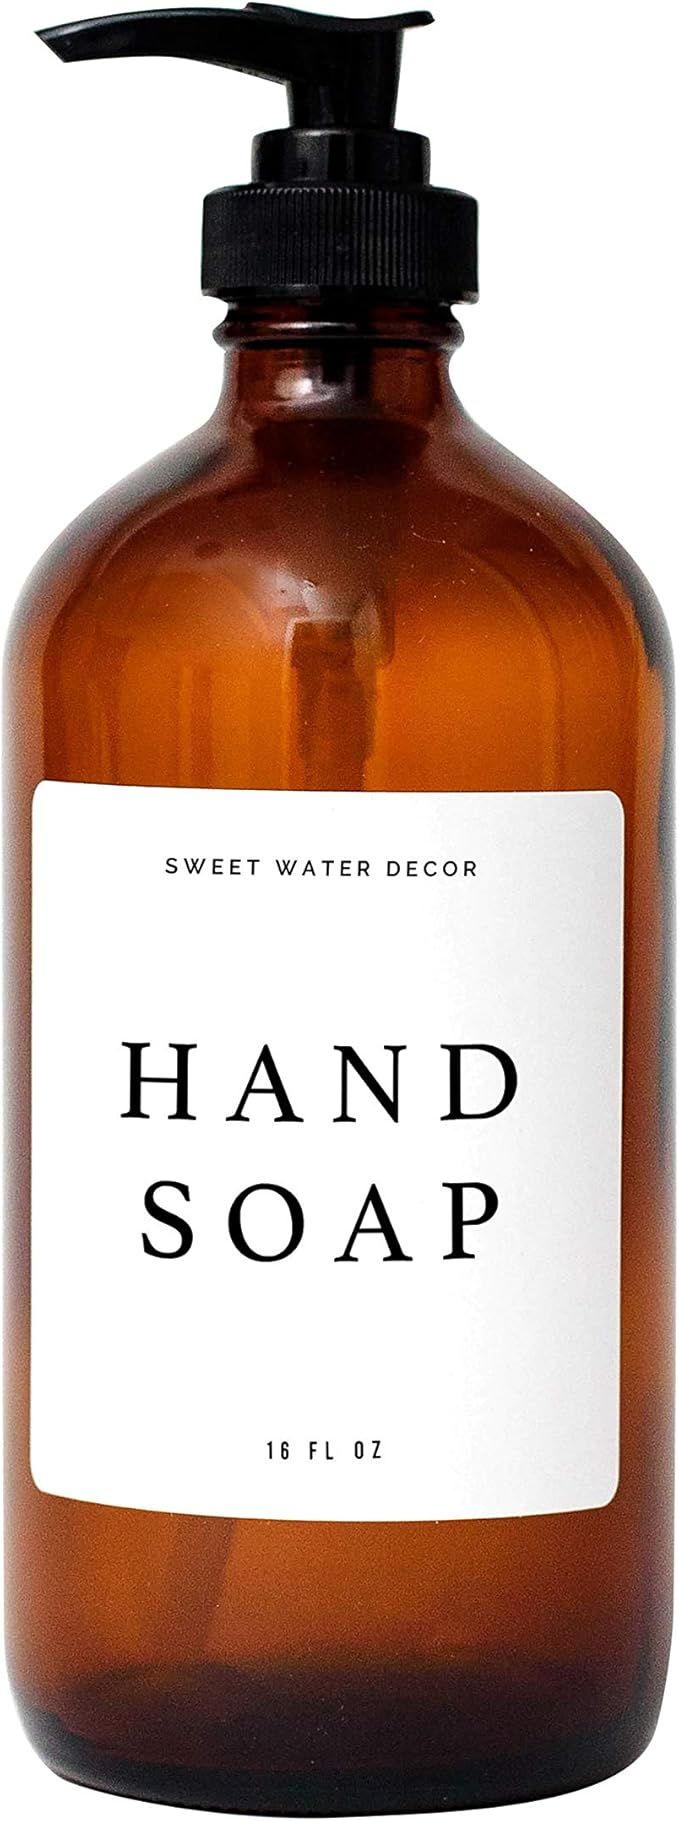 Sweet Water Decor Amber Glass Jar Refill Hand Soap Dispenser | 16 oz Refillable Bottle with Pump ... | Amazon (US)